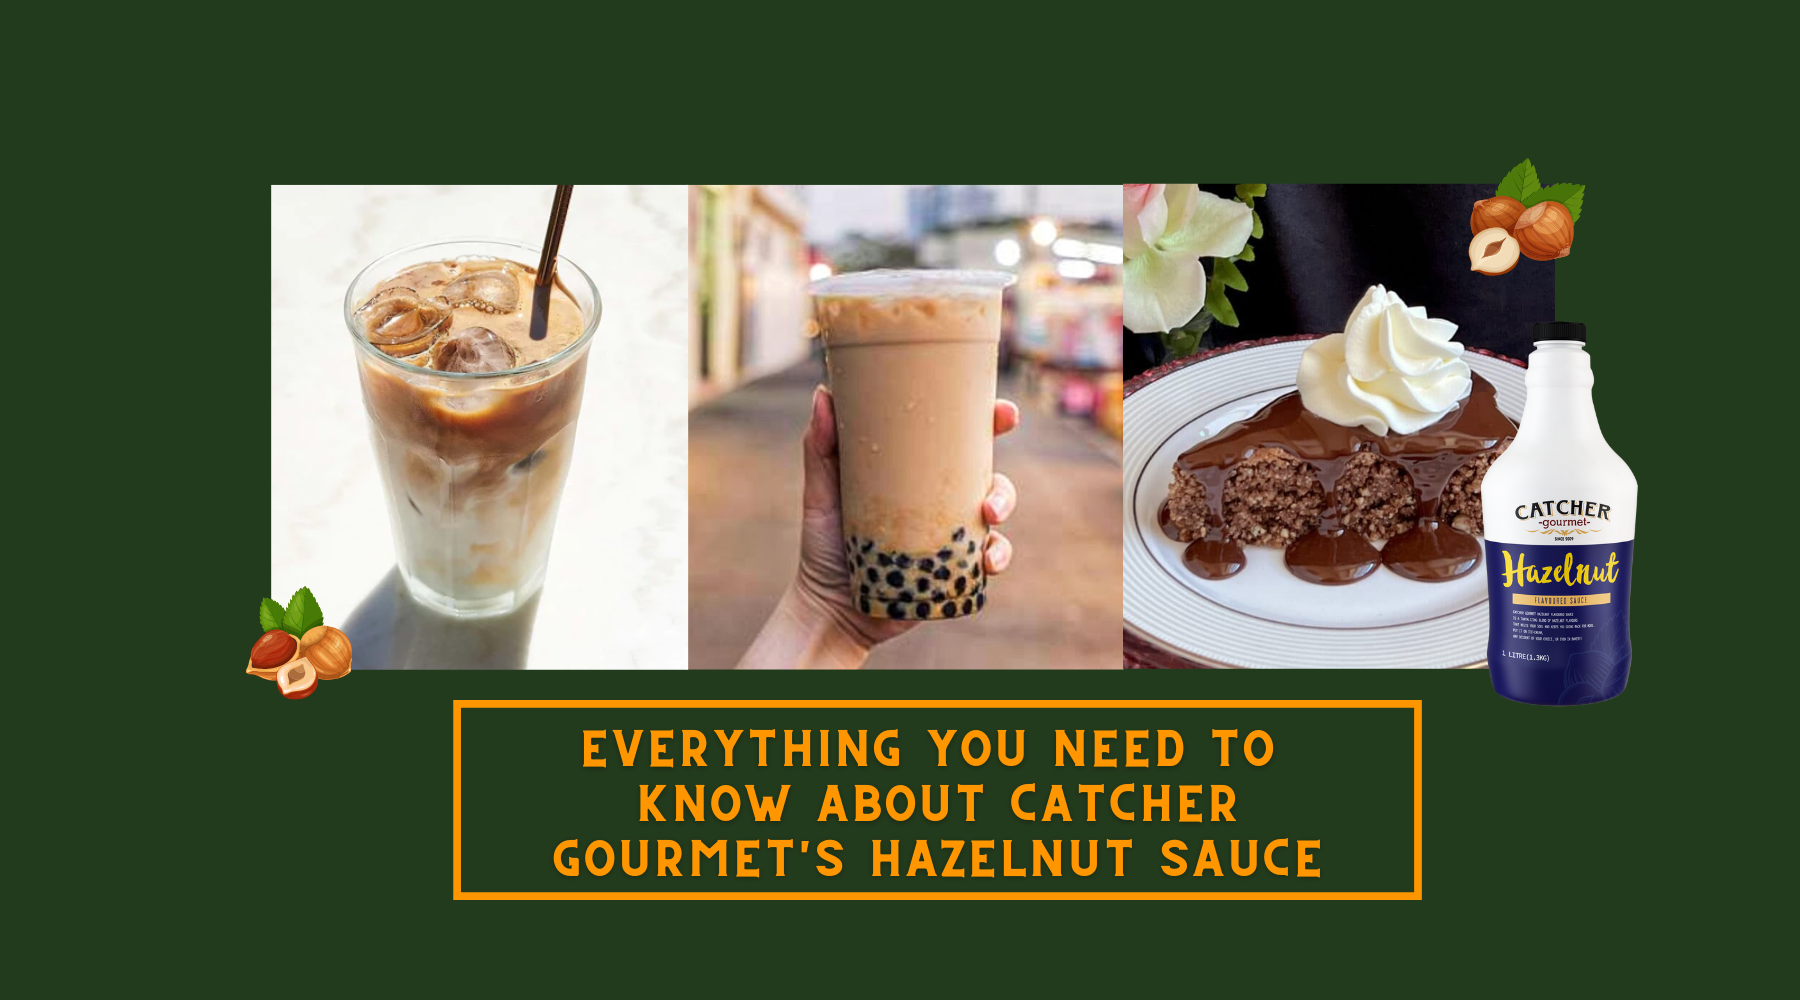 Everything You Need To Know About Catcher Gourmet’s Hazelnut Sauce